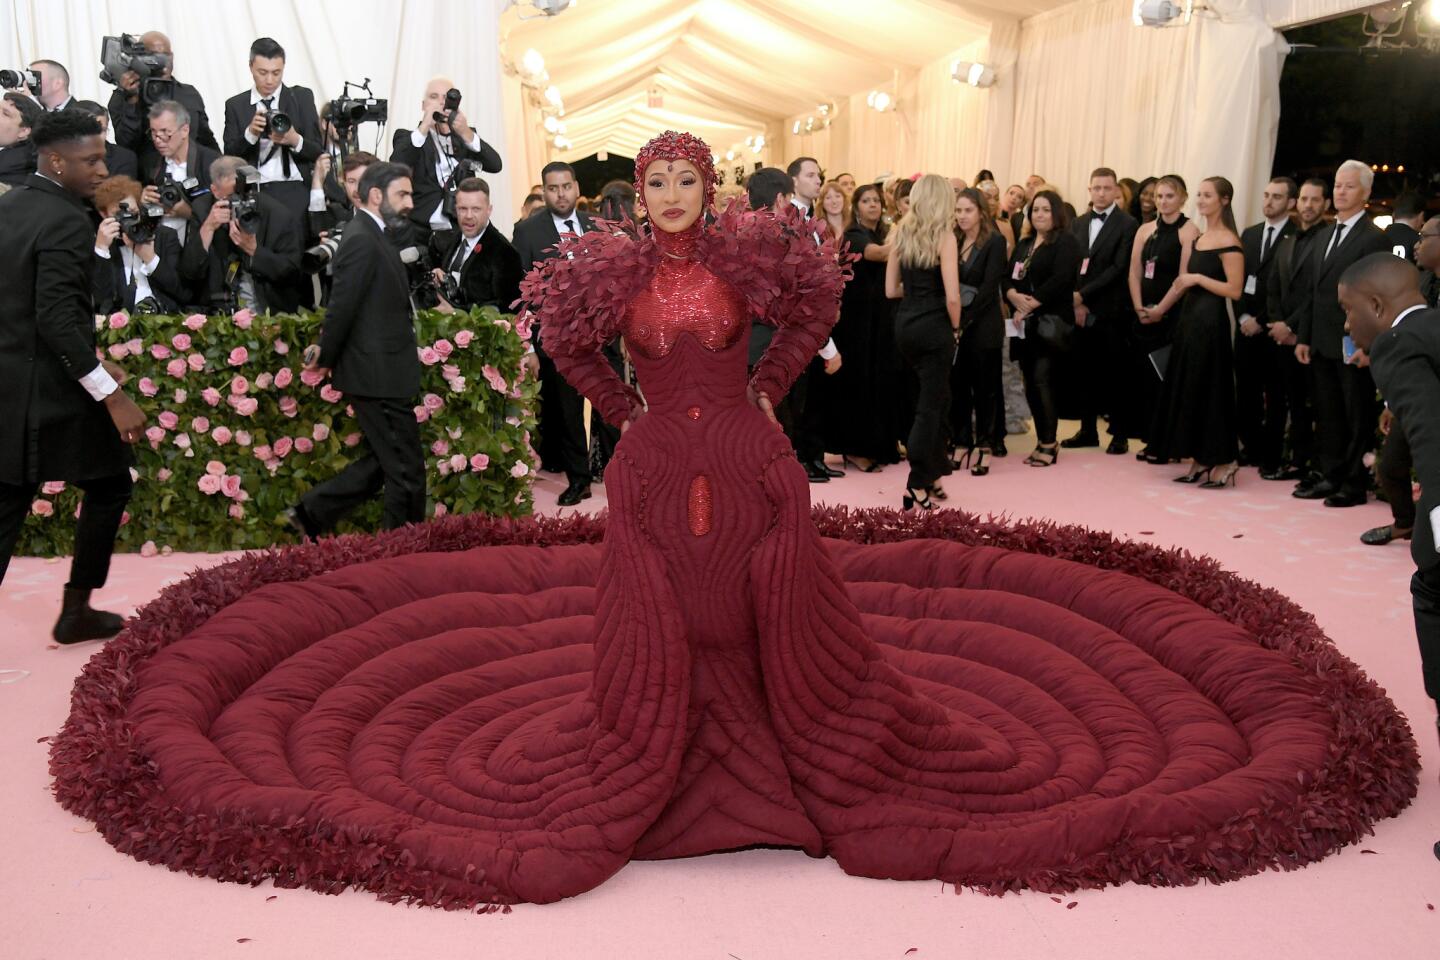 Cardi B arrives in a custom oxblood-colored Thom Browne gown with a bedazzled swim cap-style headpiece.